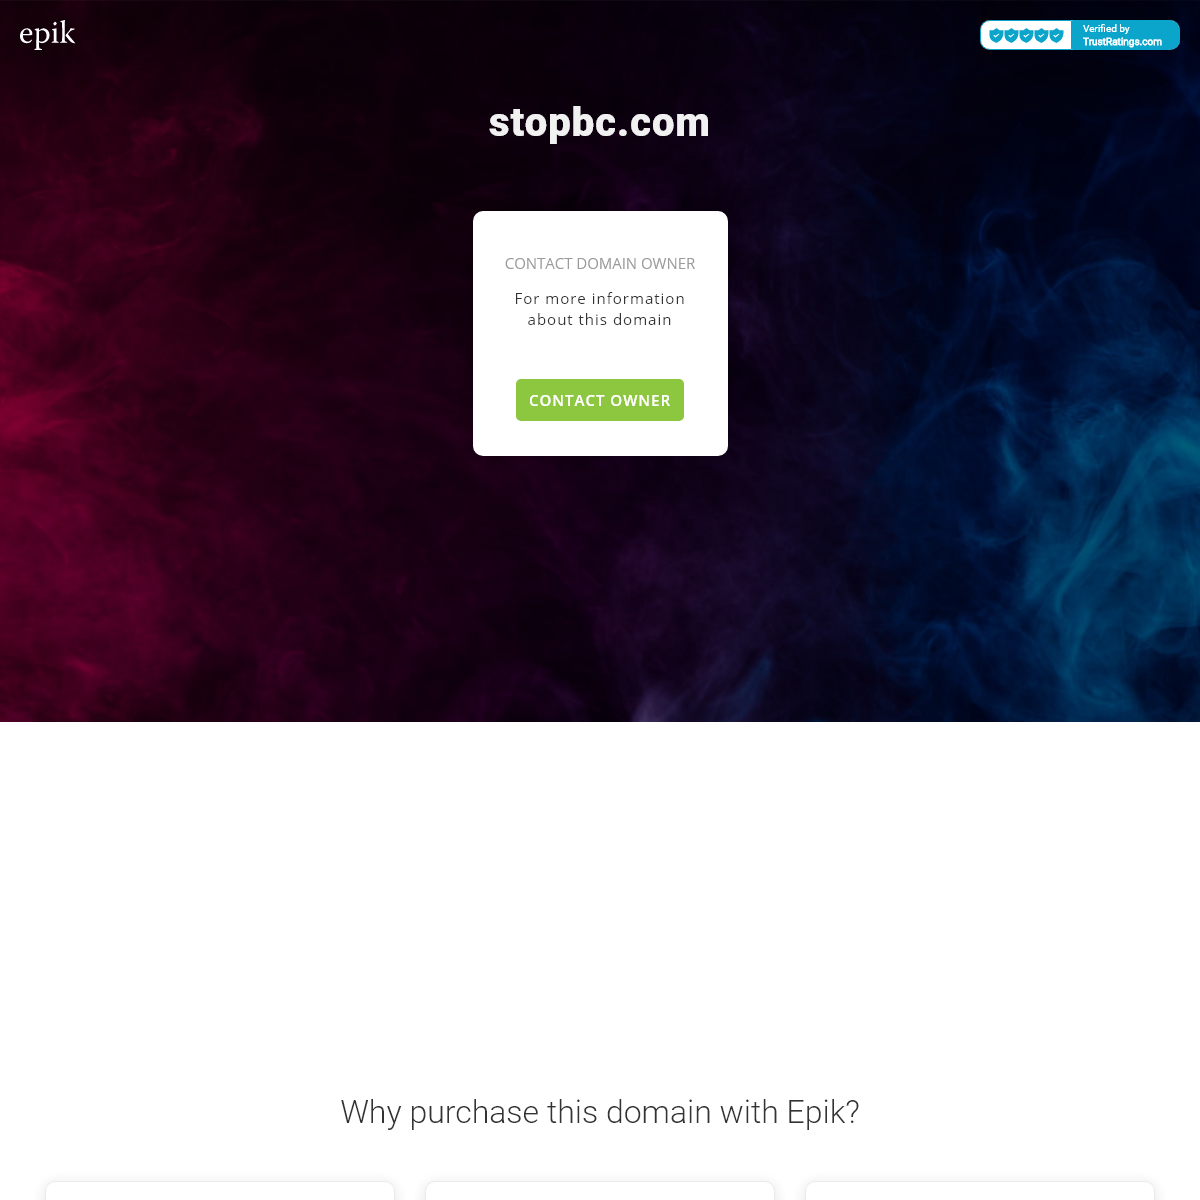 A complete backup of stopbc.com